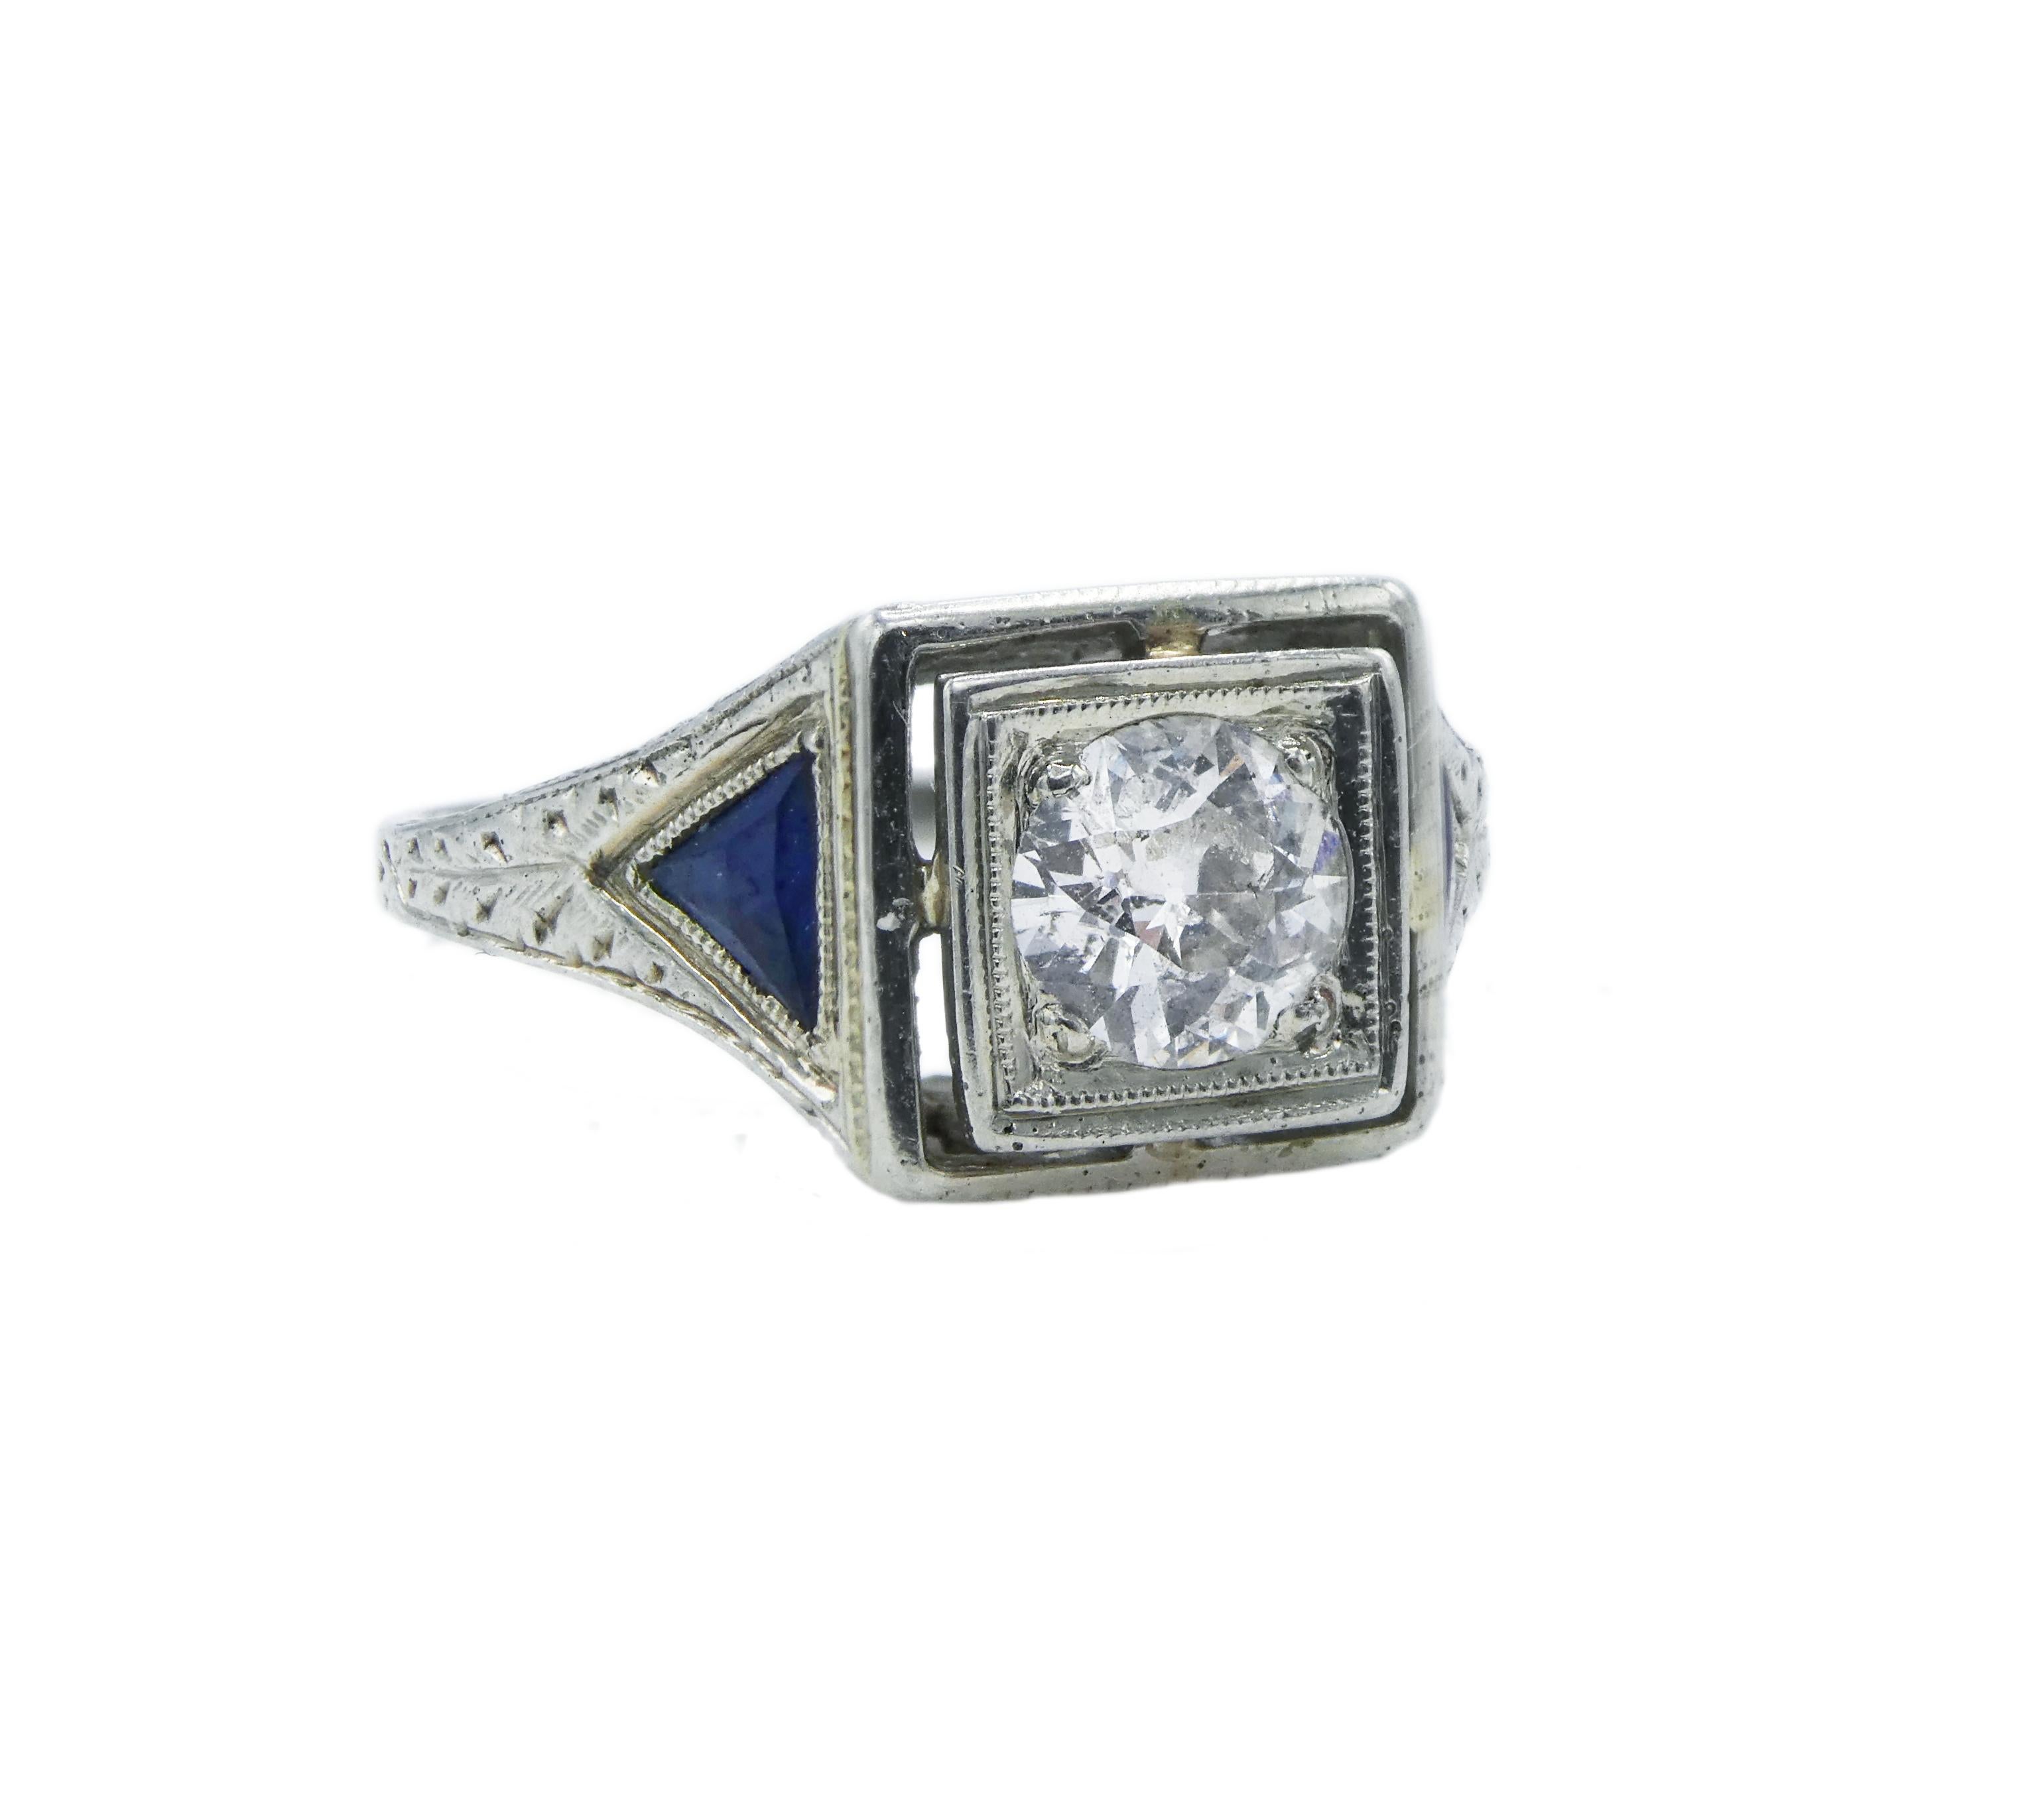 European Cut 0.35ct Diamond Sapphire 18 Karat White Gold Engagement Ring

Metal: 18k White Gold
Center Stone: Approx. 0.35ct European Cut Diamond G-H in color and I1/2 in clarity
Side Stones: two trillion blue sapphires measuring approx. 3.6mm x